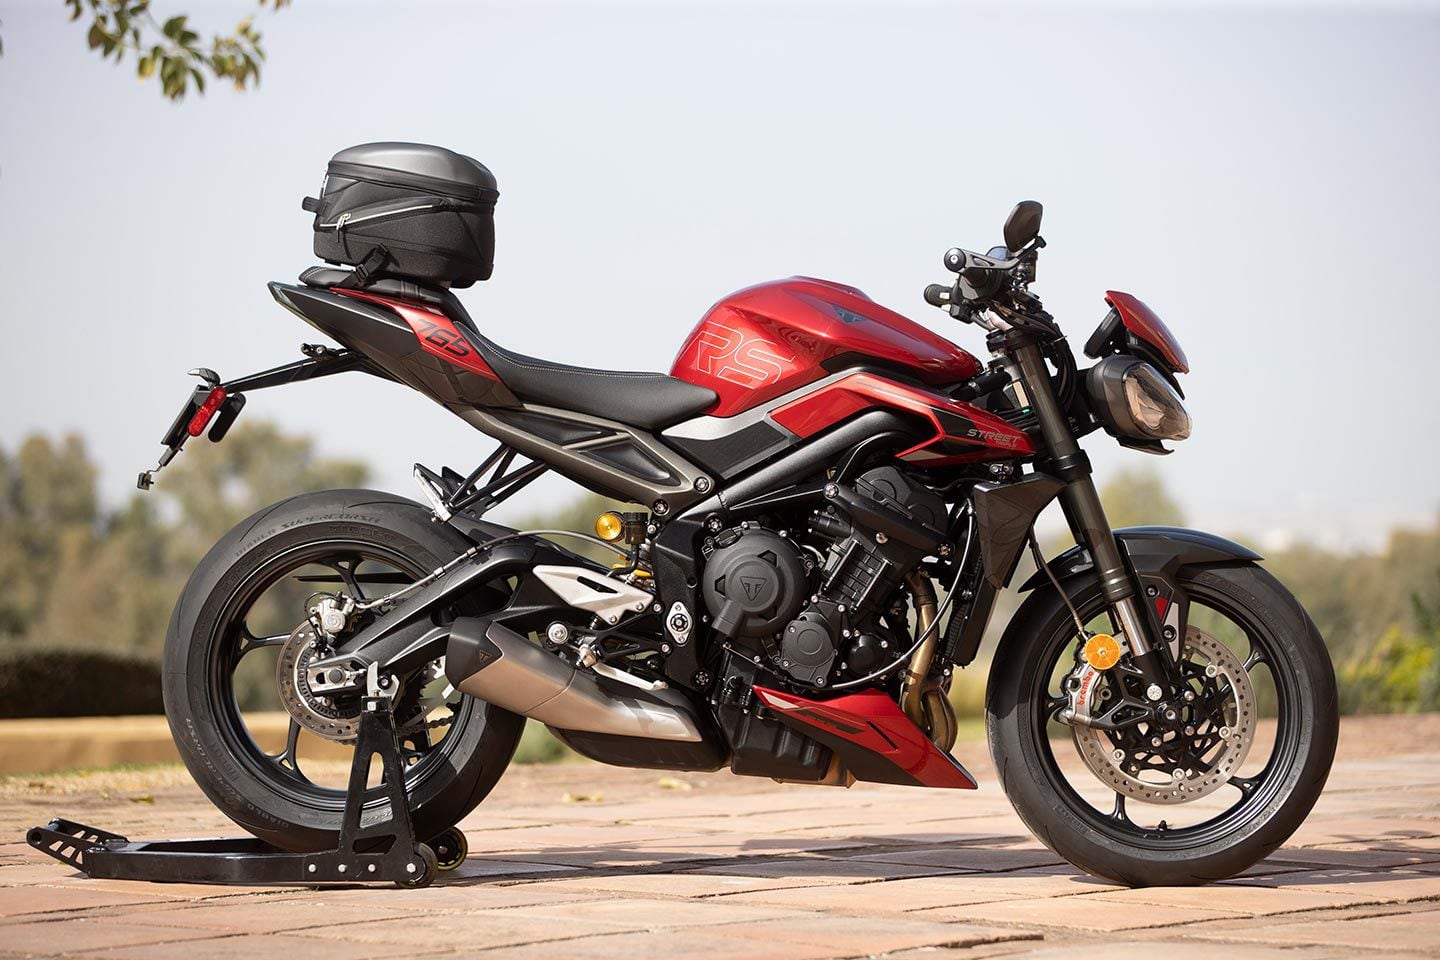 Triumph offers 50-plus accessories for the Street Triple 765. Given the increased seat height of the RS, the company is especially keen to highlight the low seat option, which lowers the seat height by 28mm. Removing the shim on the RS lowers the seat another 10mm.